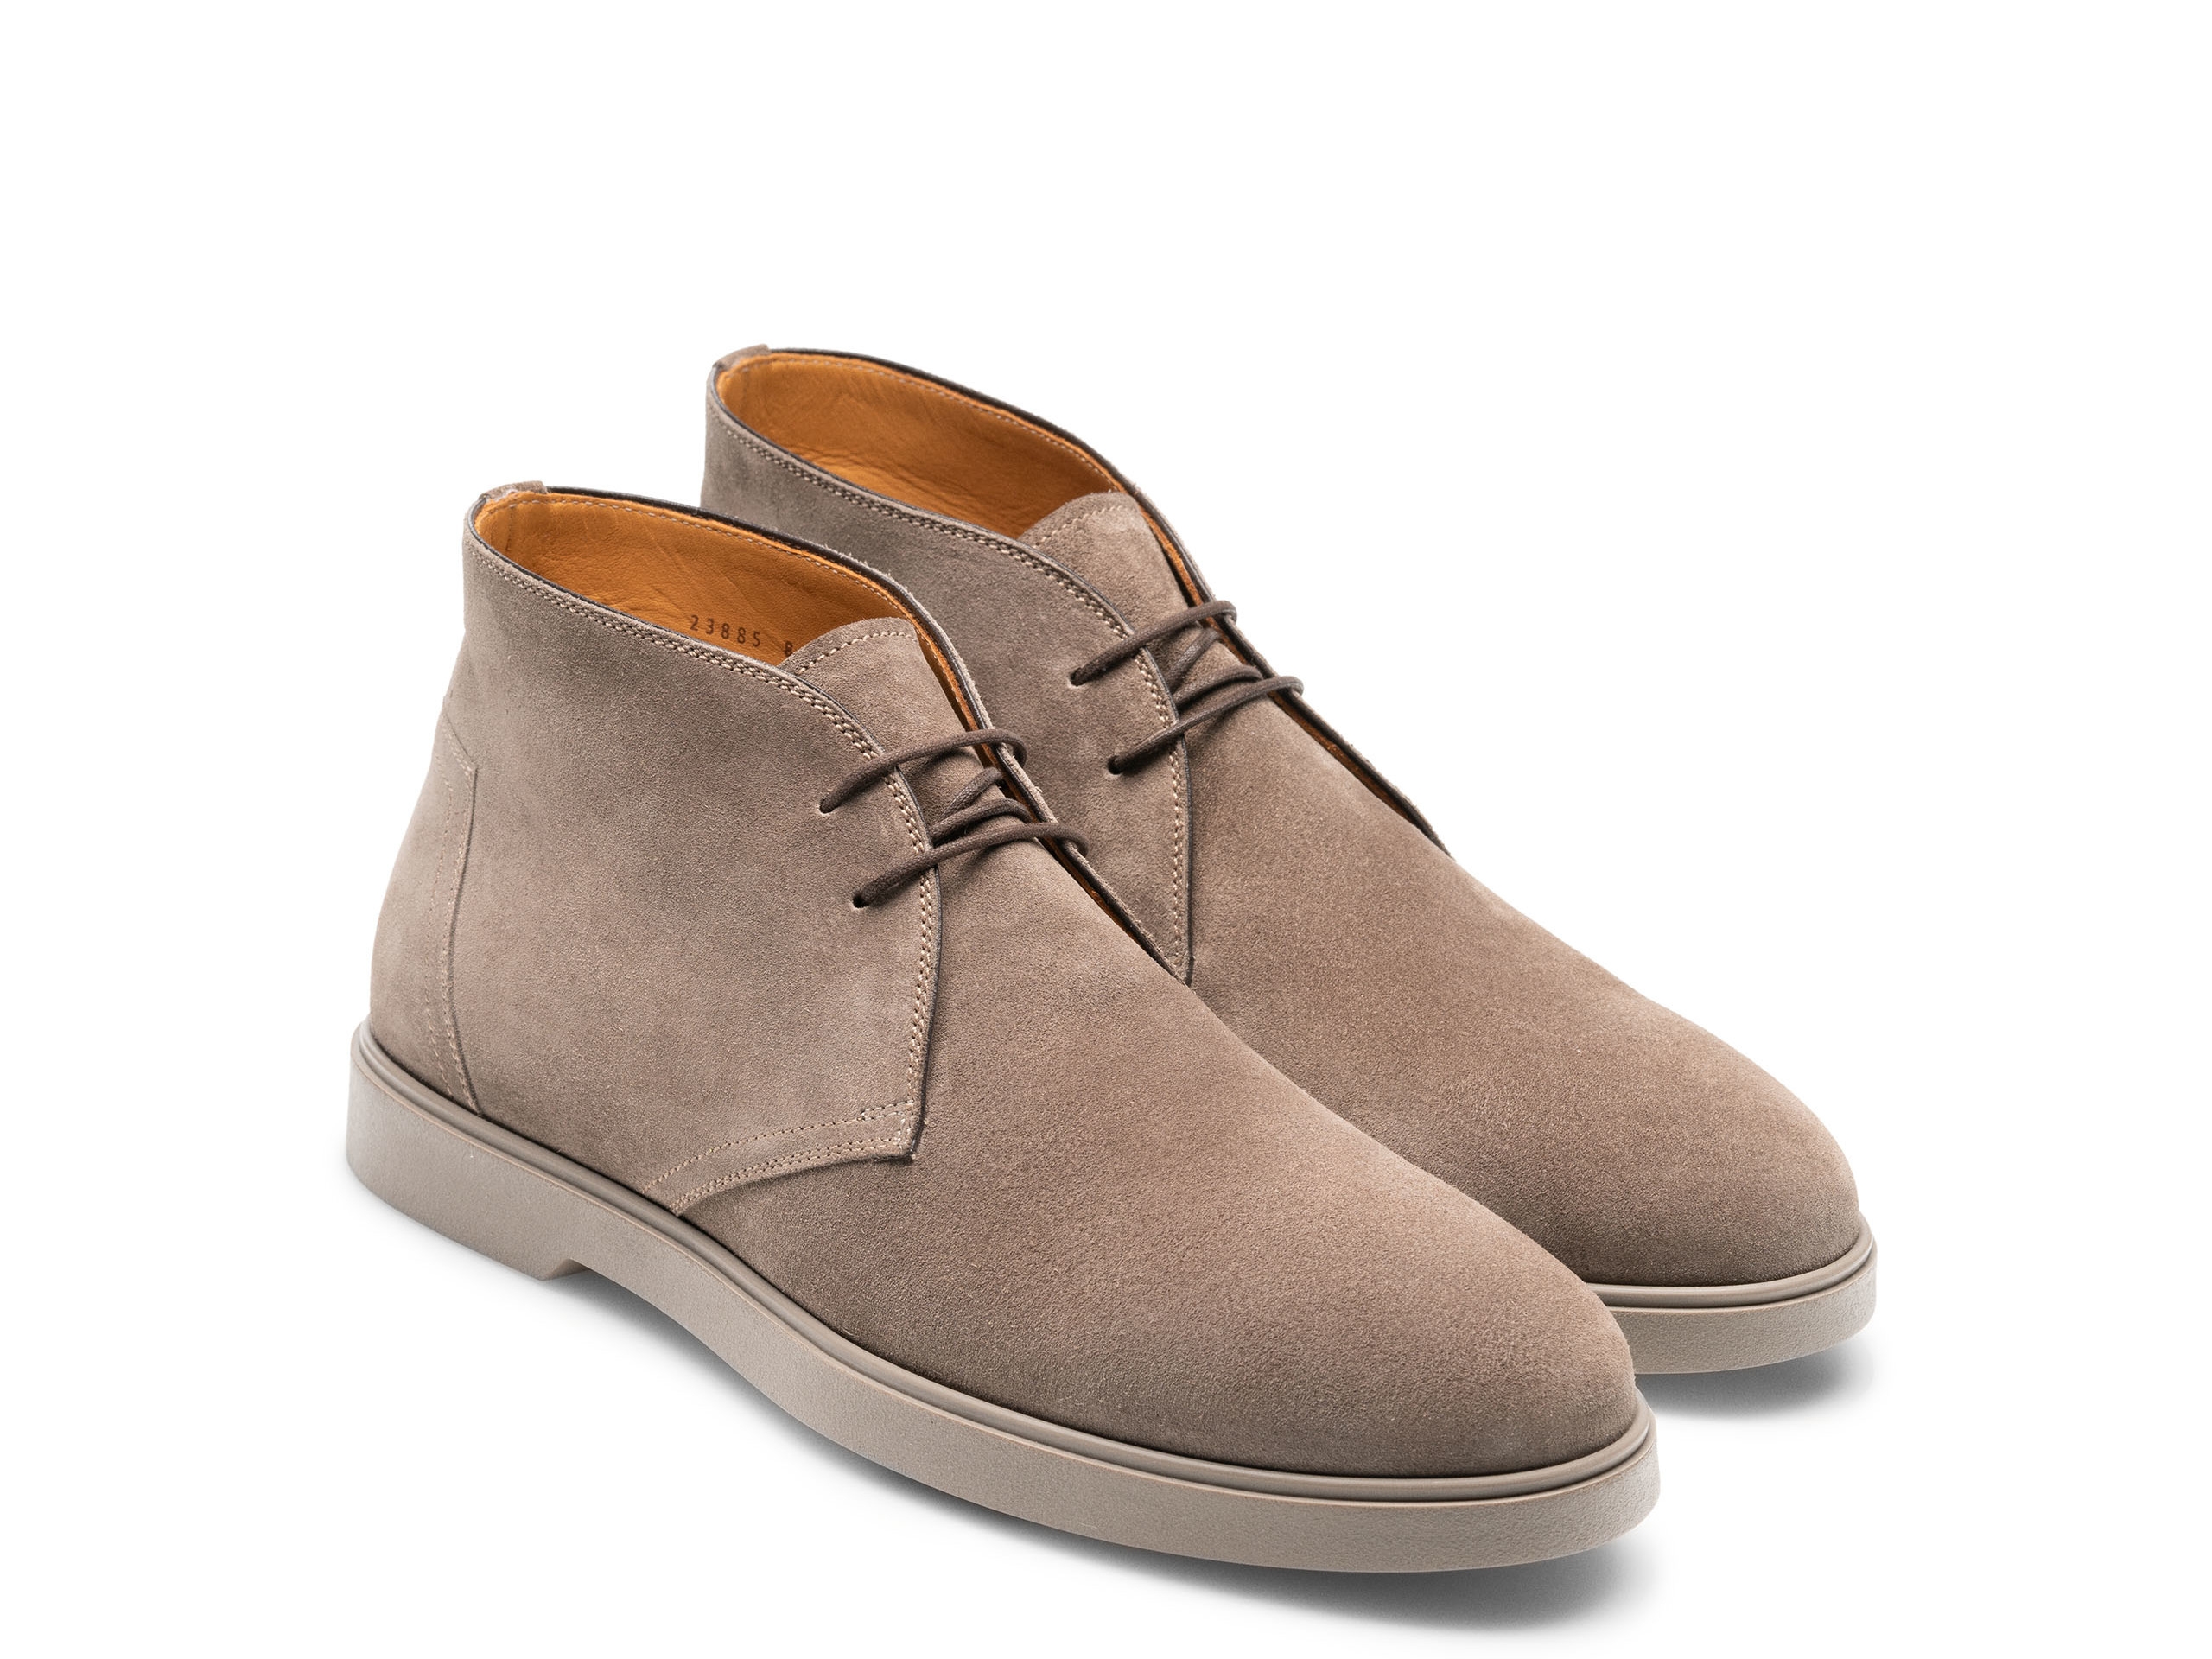 Pair of the Duran Taupe Suede